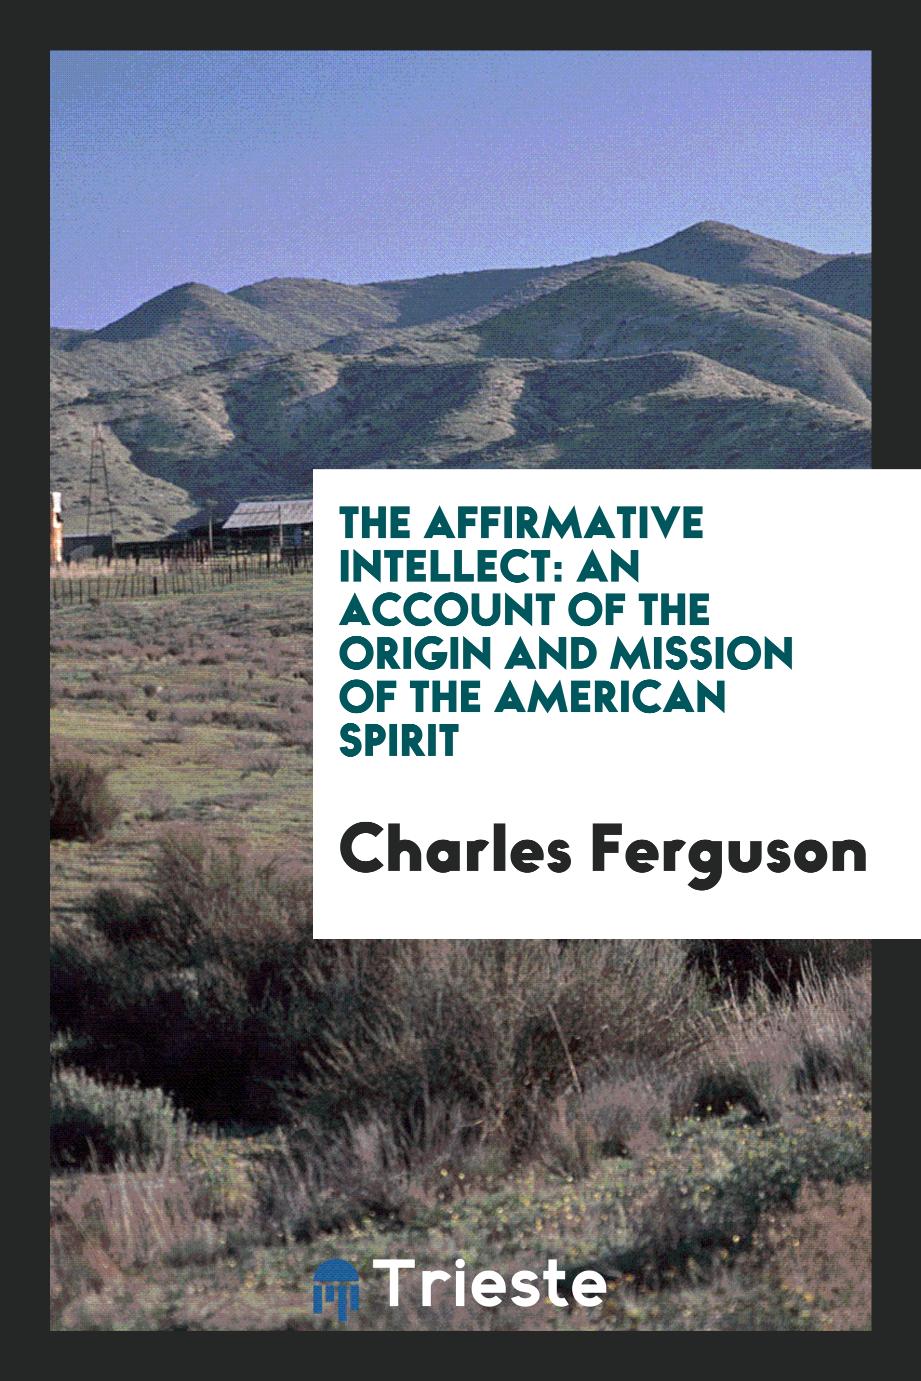 The affirmative intellect: an account of the origin and mission of the American spirit